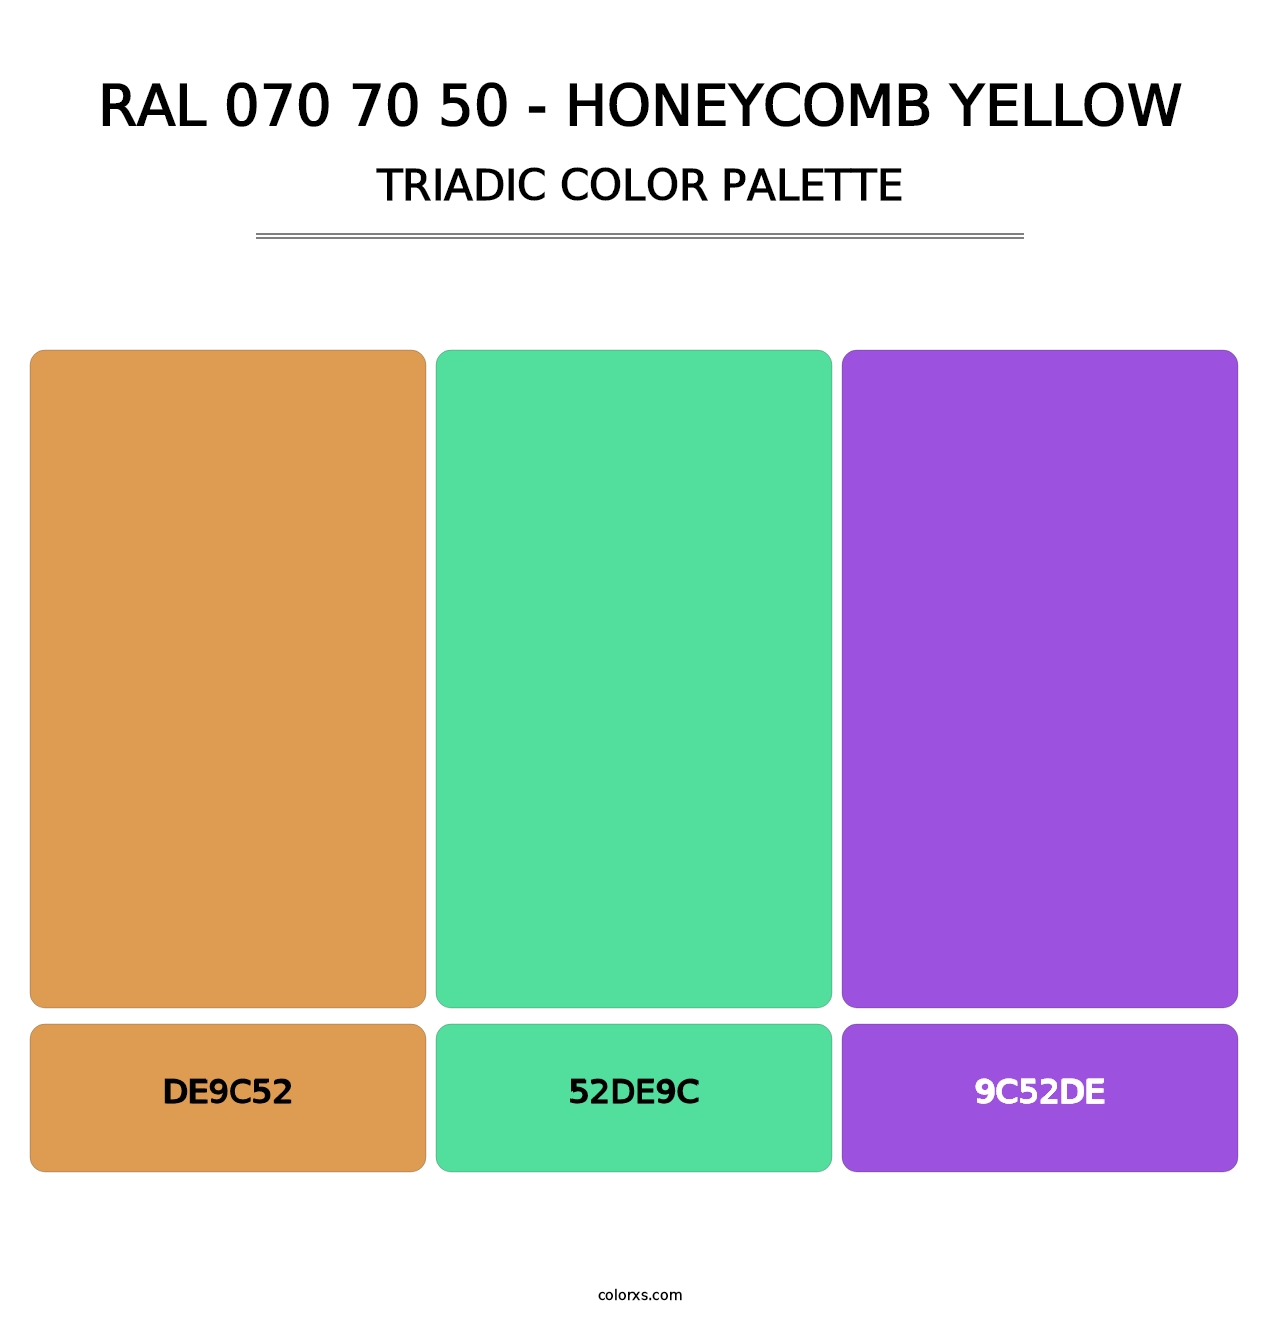 RAL 070 70 50 - Honeycomb Yellow - Triadic Color Palette